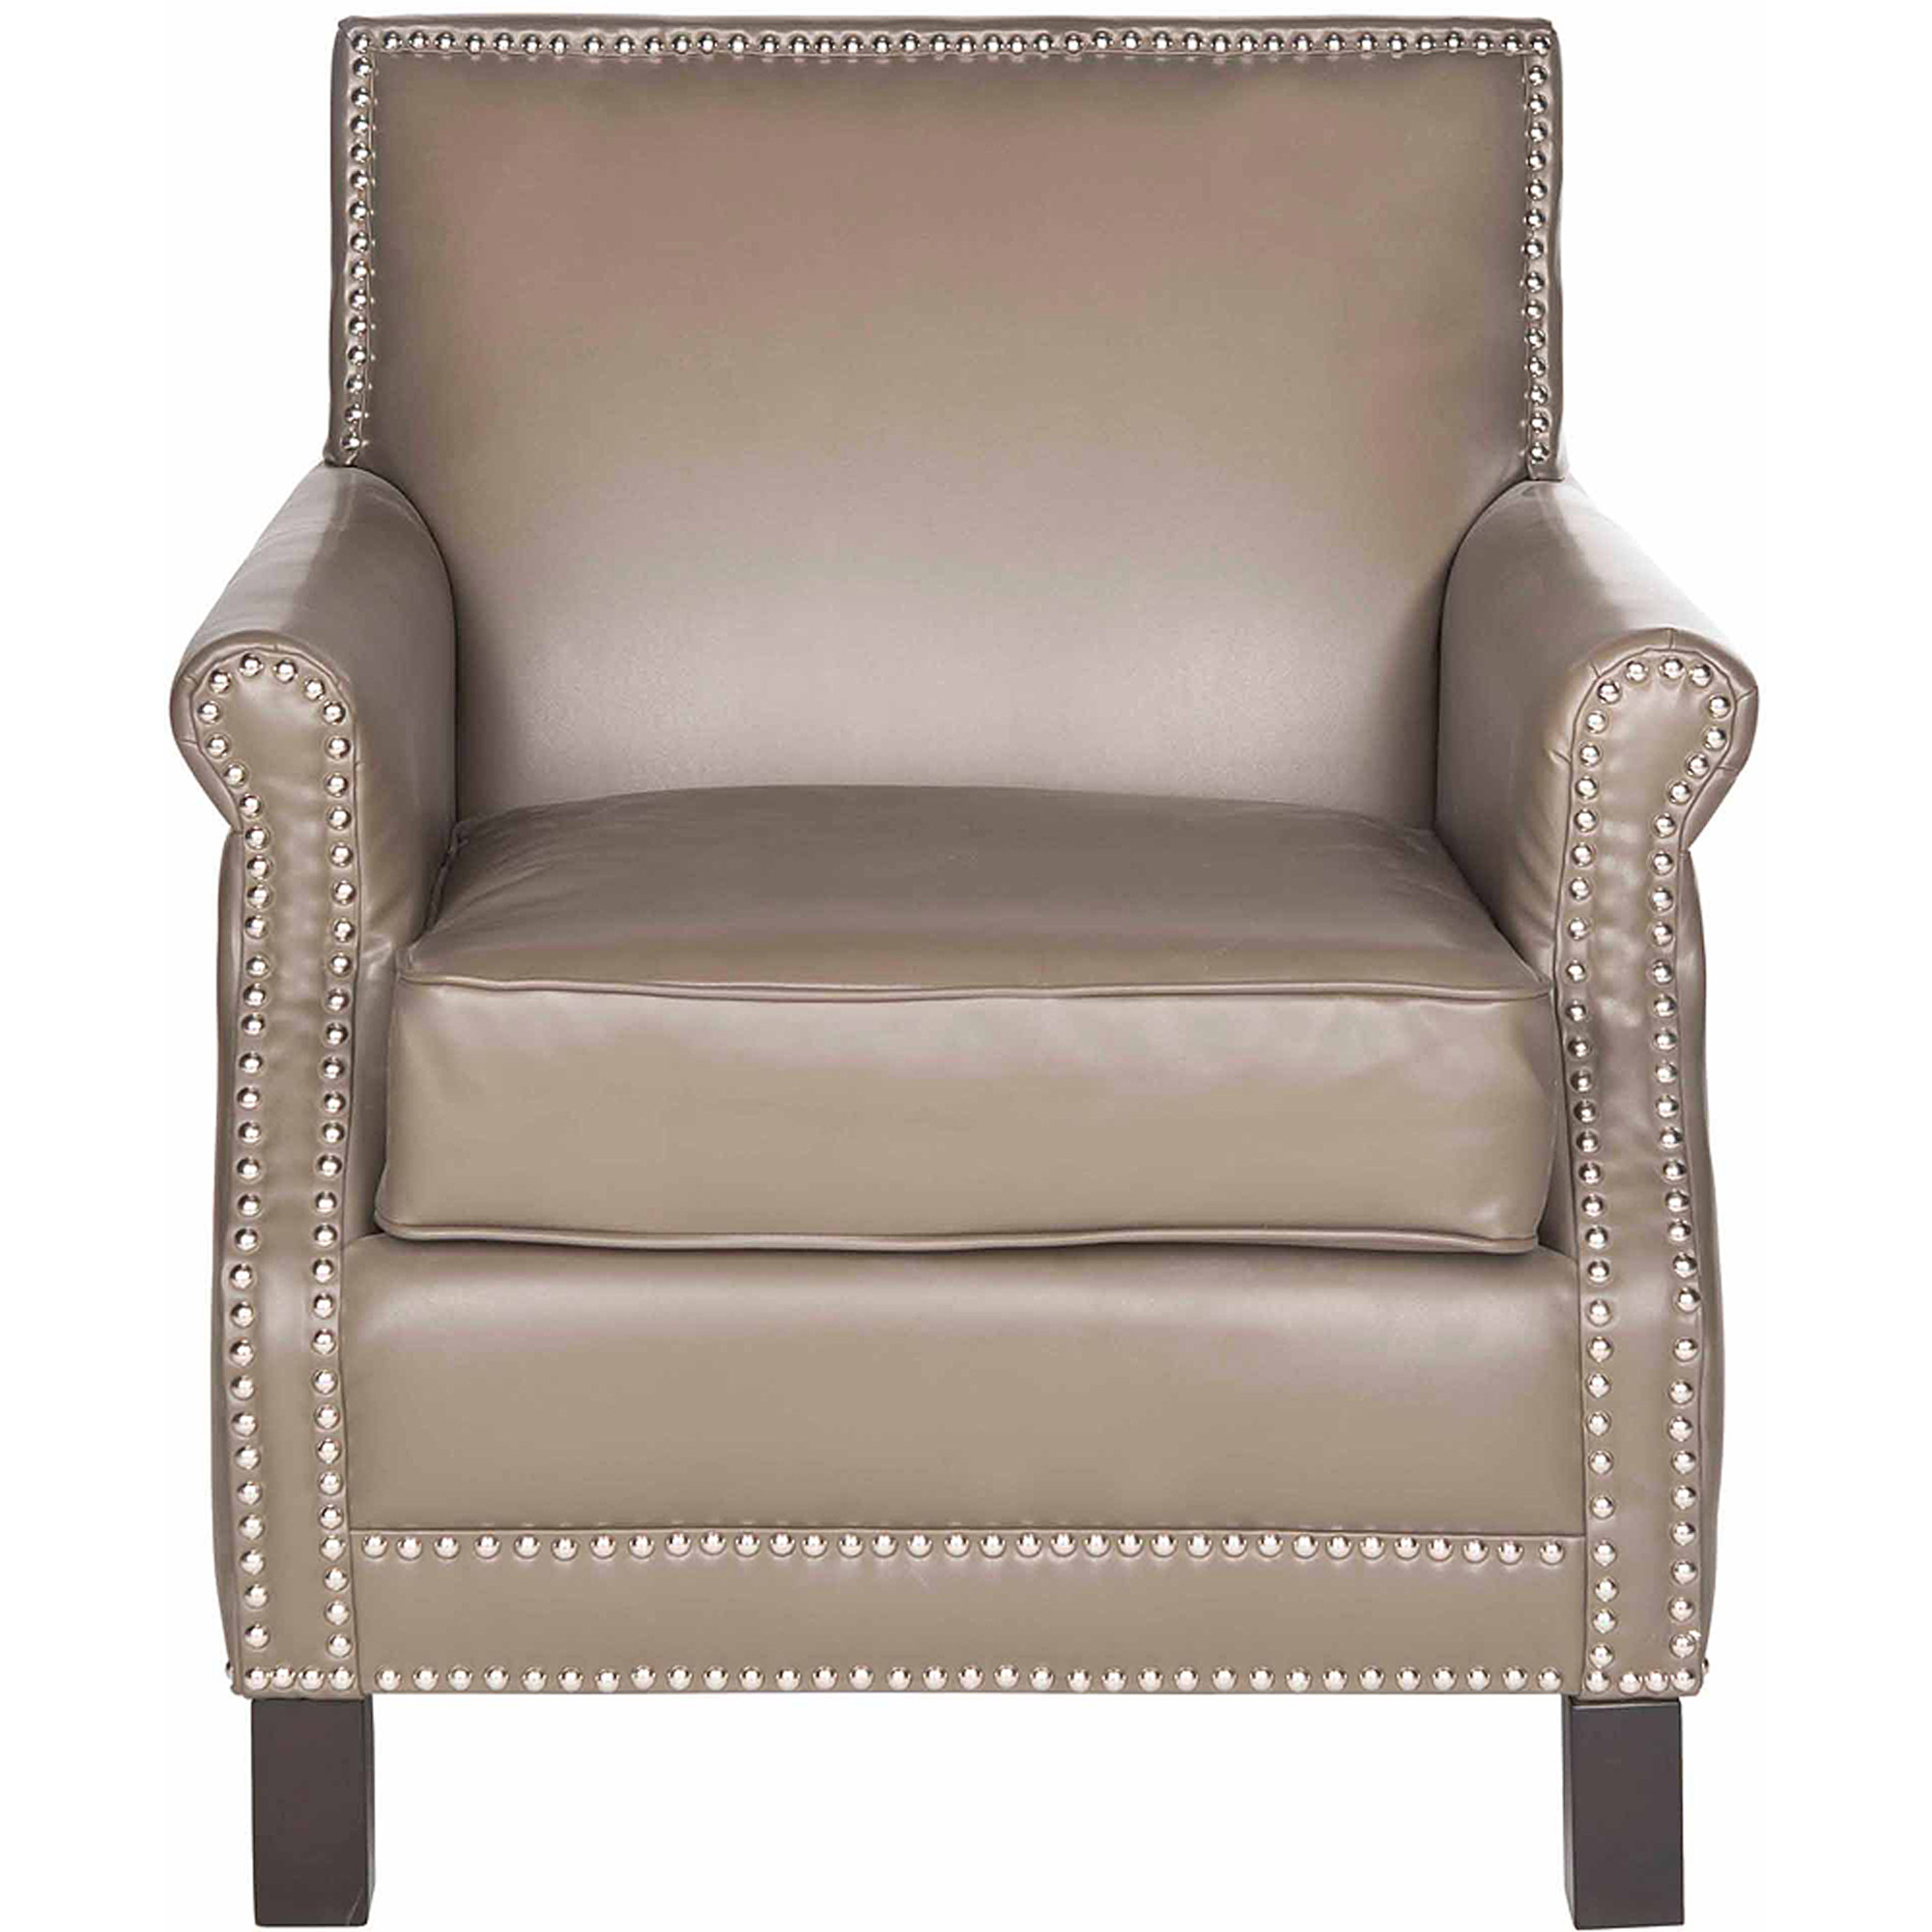 SAFAVIEH Easton Rustic Glam Upholstered Club Chair w/ Nailheads, Clay - image 2 of 4